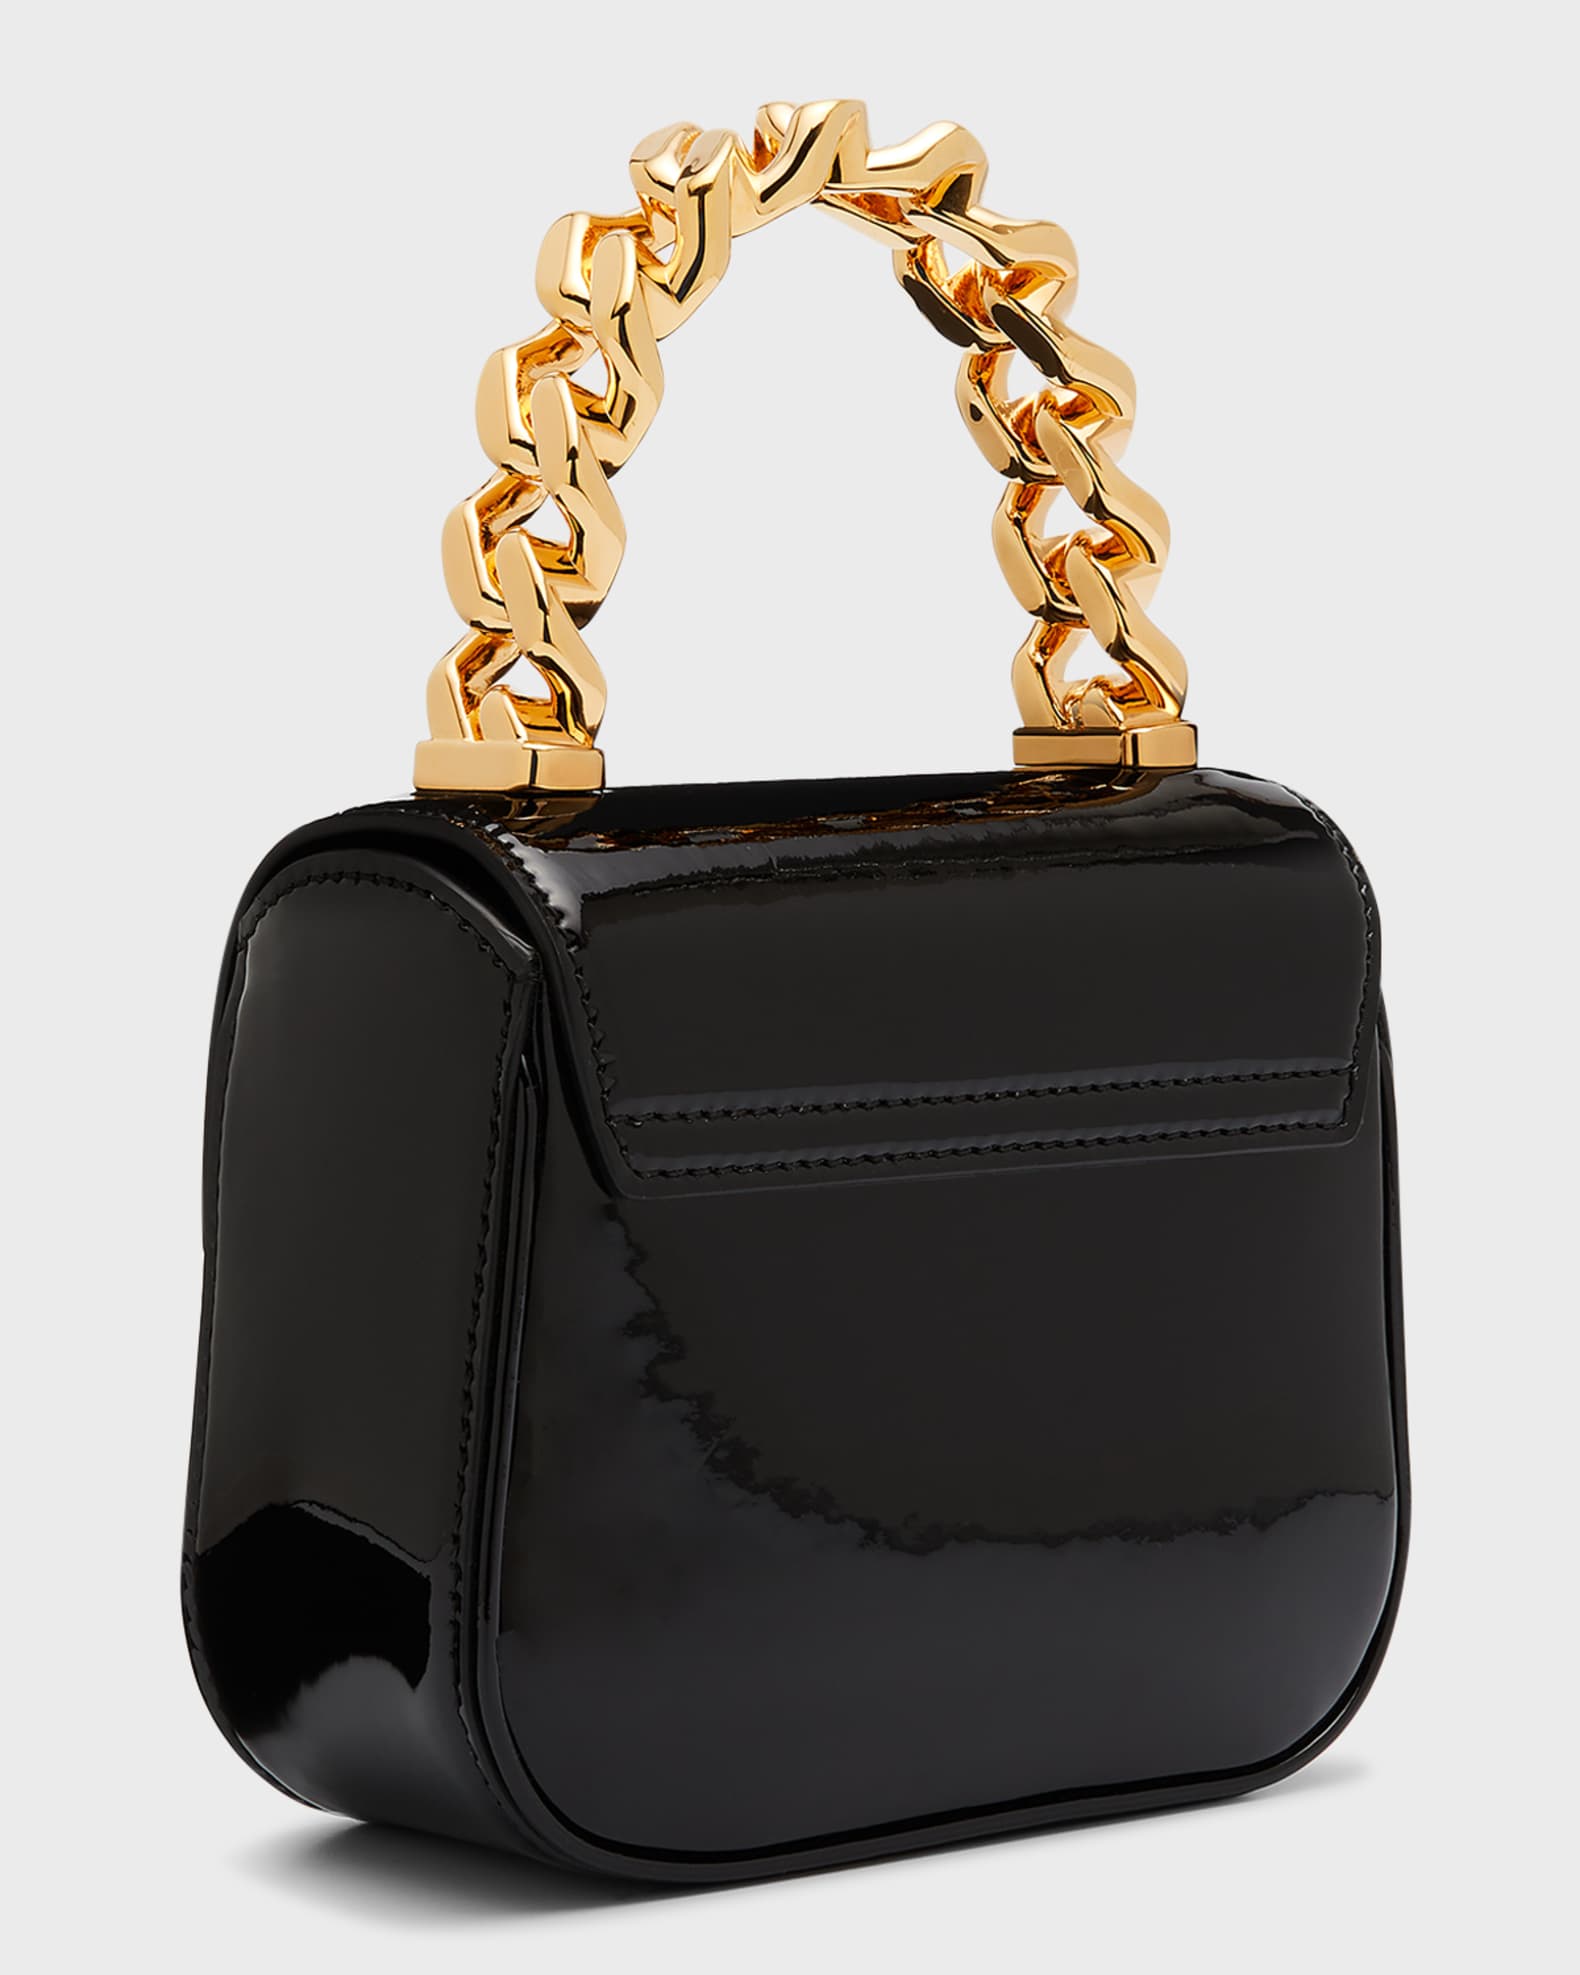 Gianni Versace Couture chain bag with Medusa